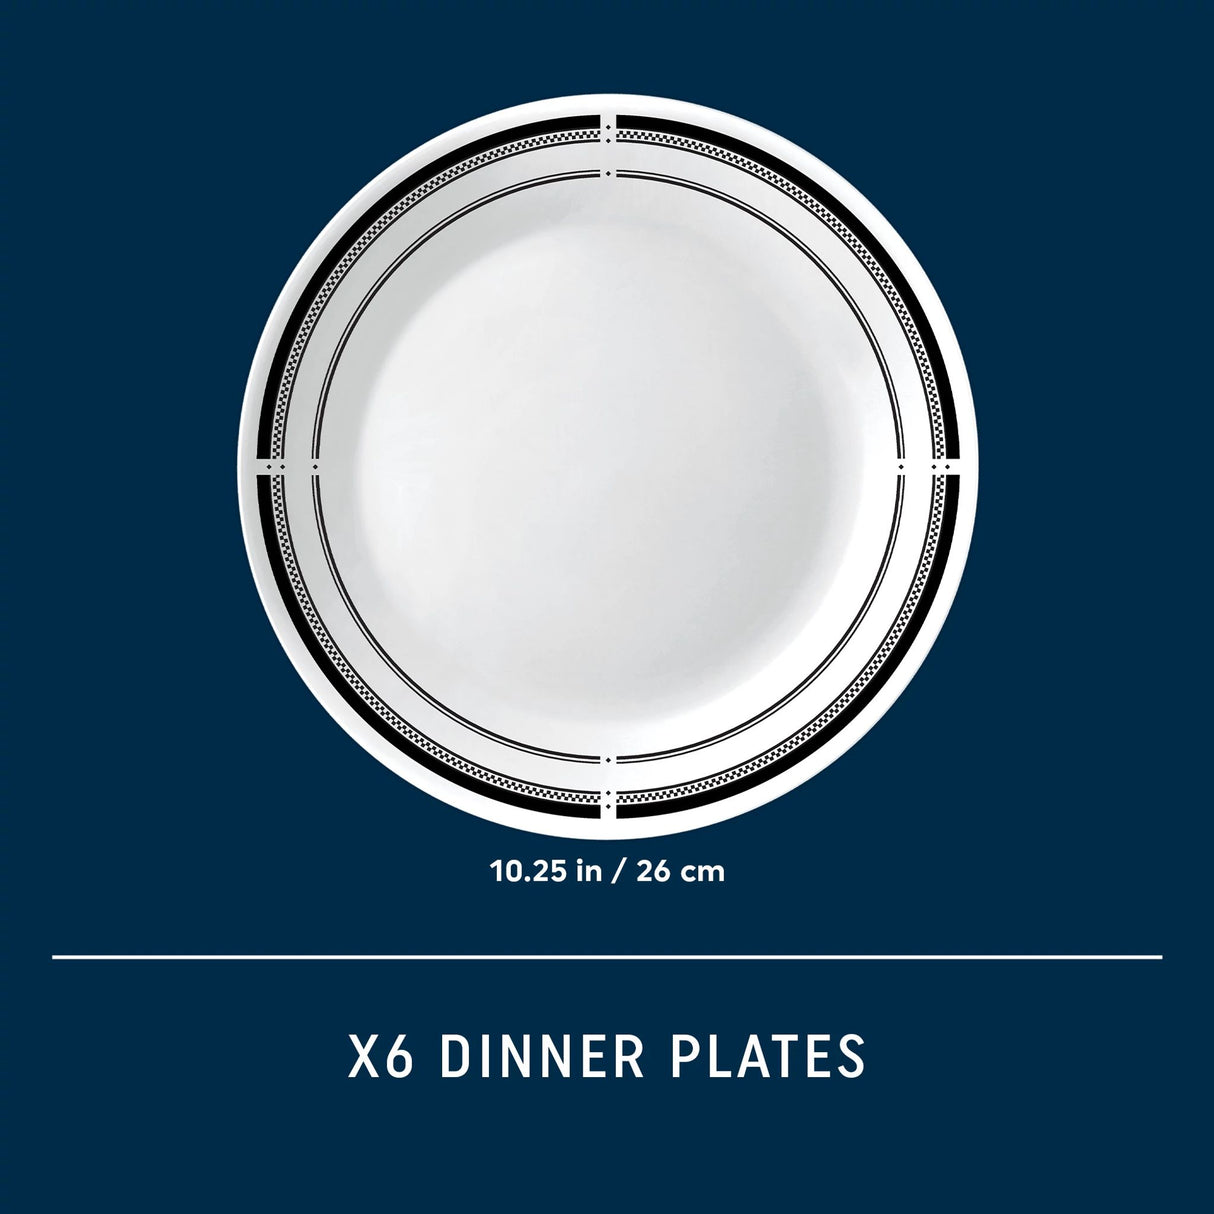  Brasserie 10.25" dinner plate with text 6 dinner plates